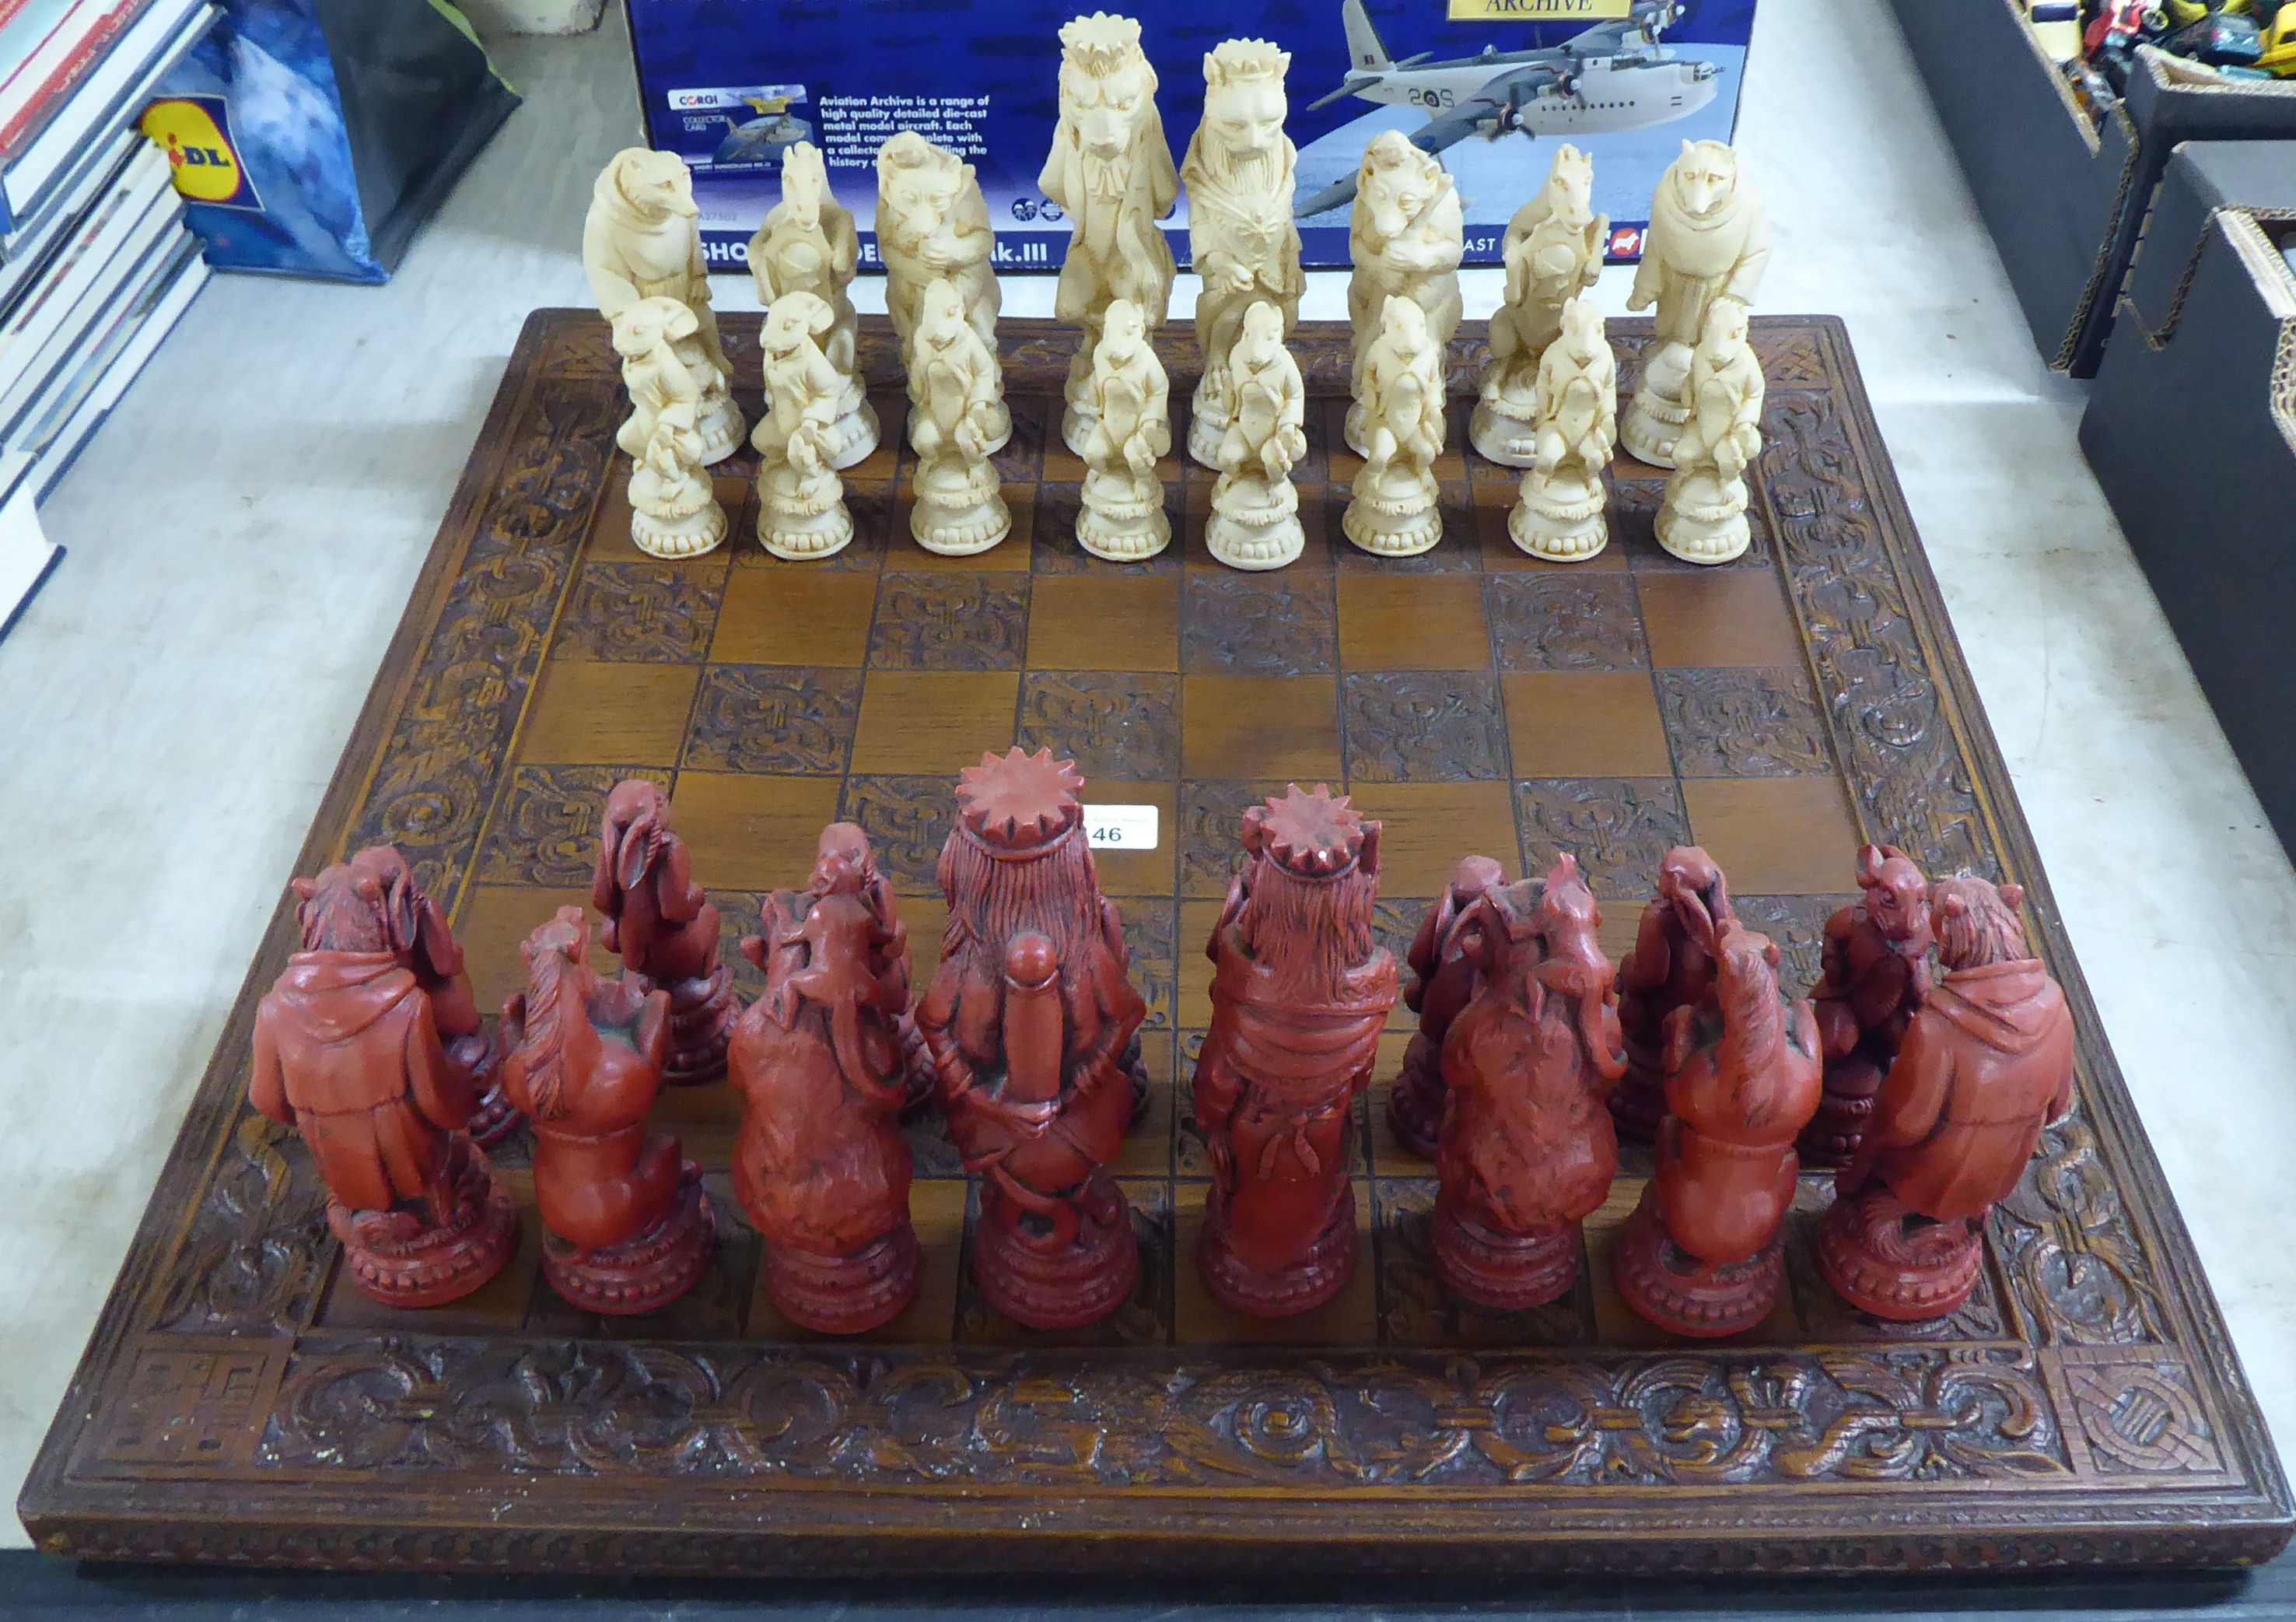 A novelty resin chess set, the board 23.5"sq